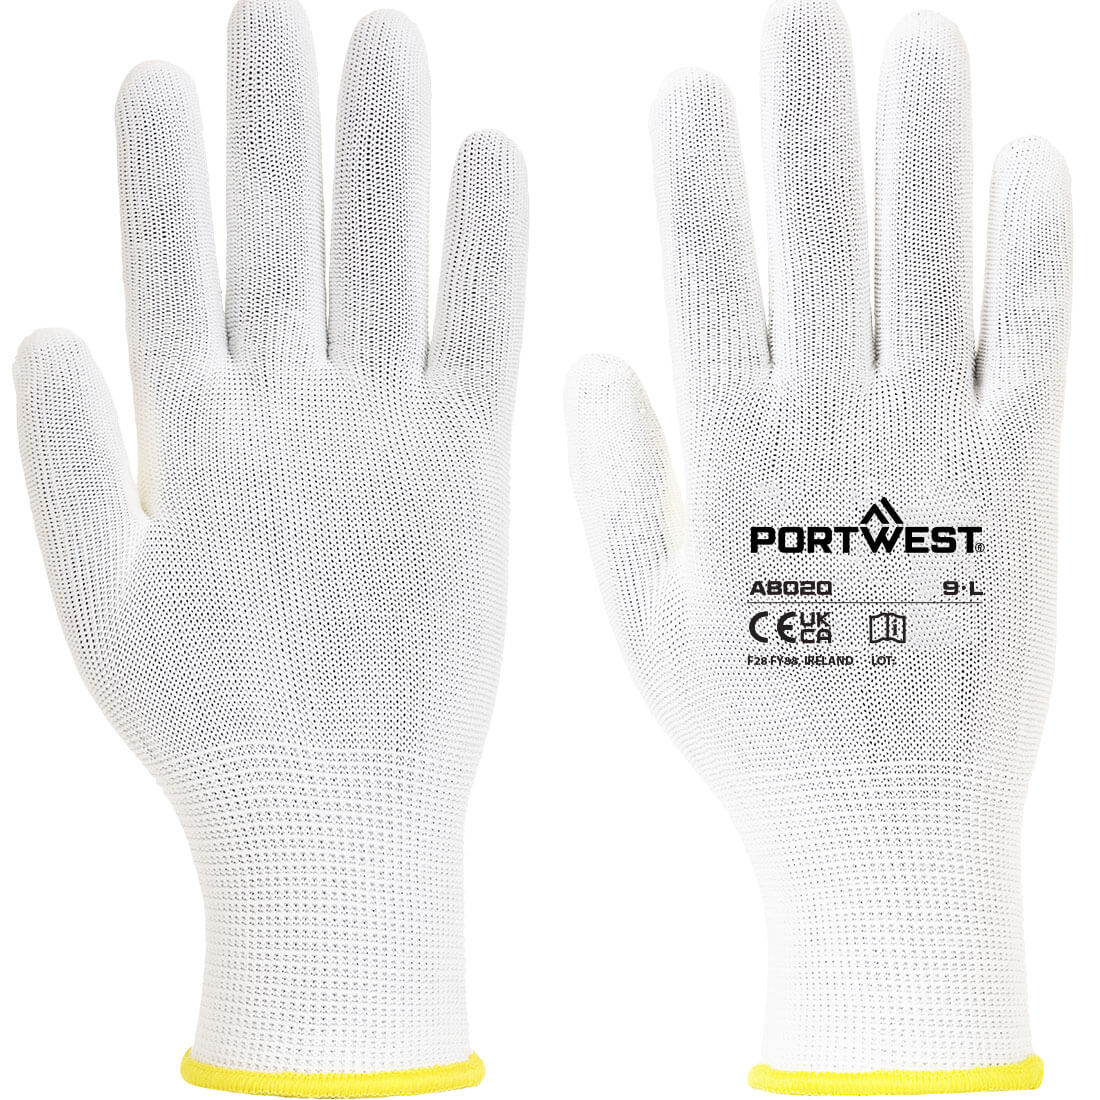 Portwest AB020 - Assembly Glove (360 Pairs)